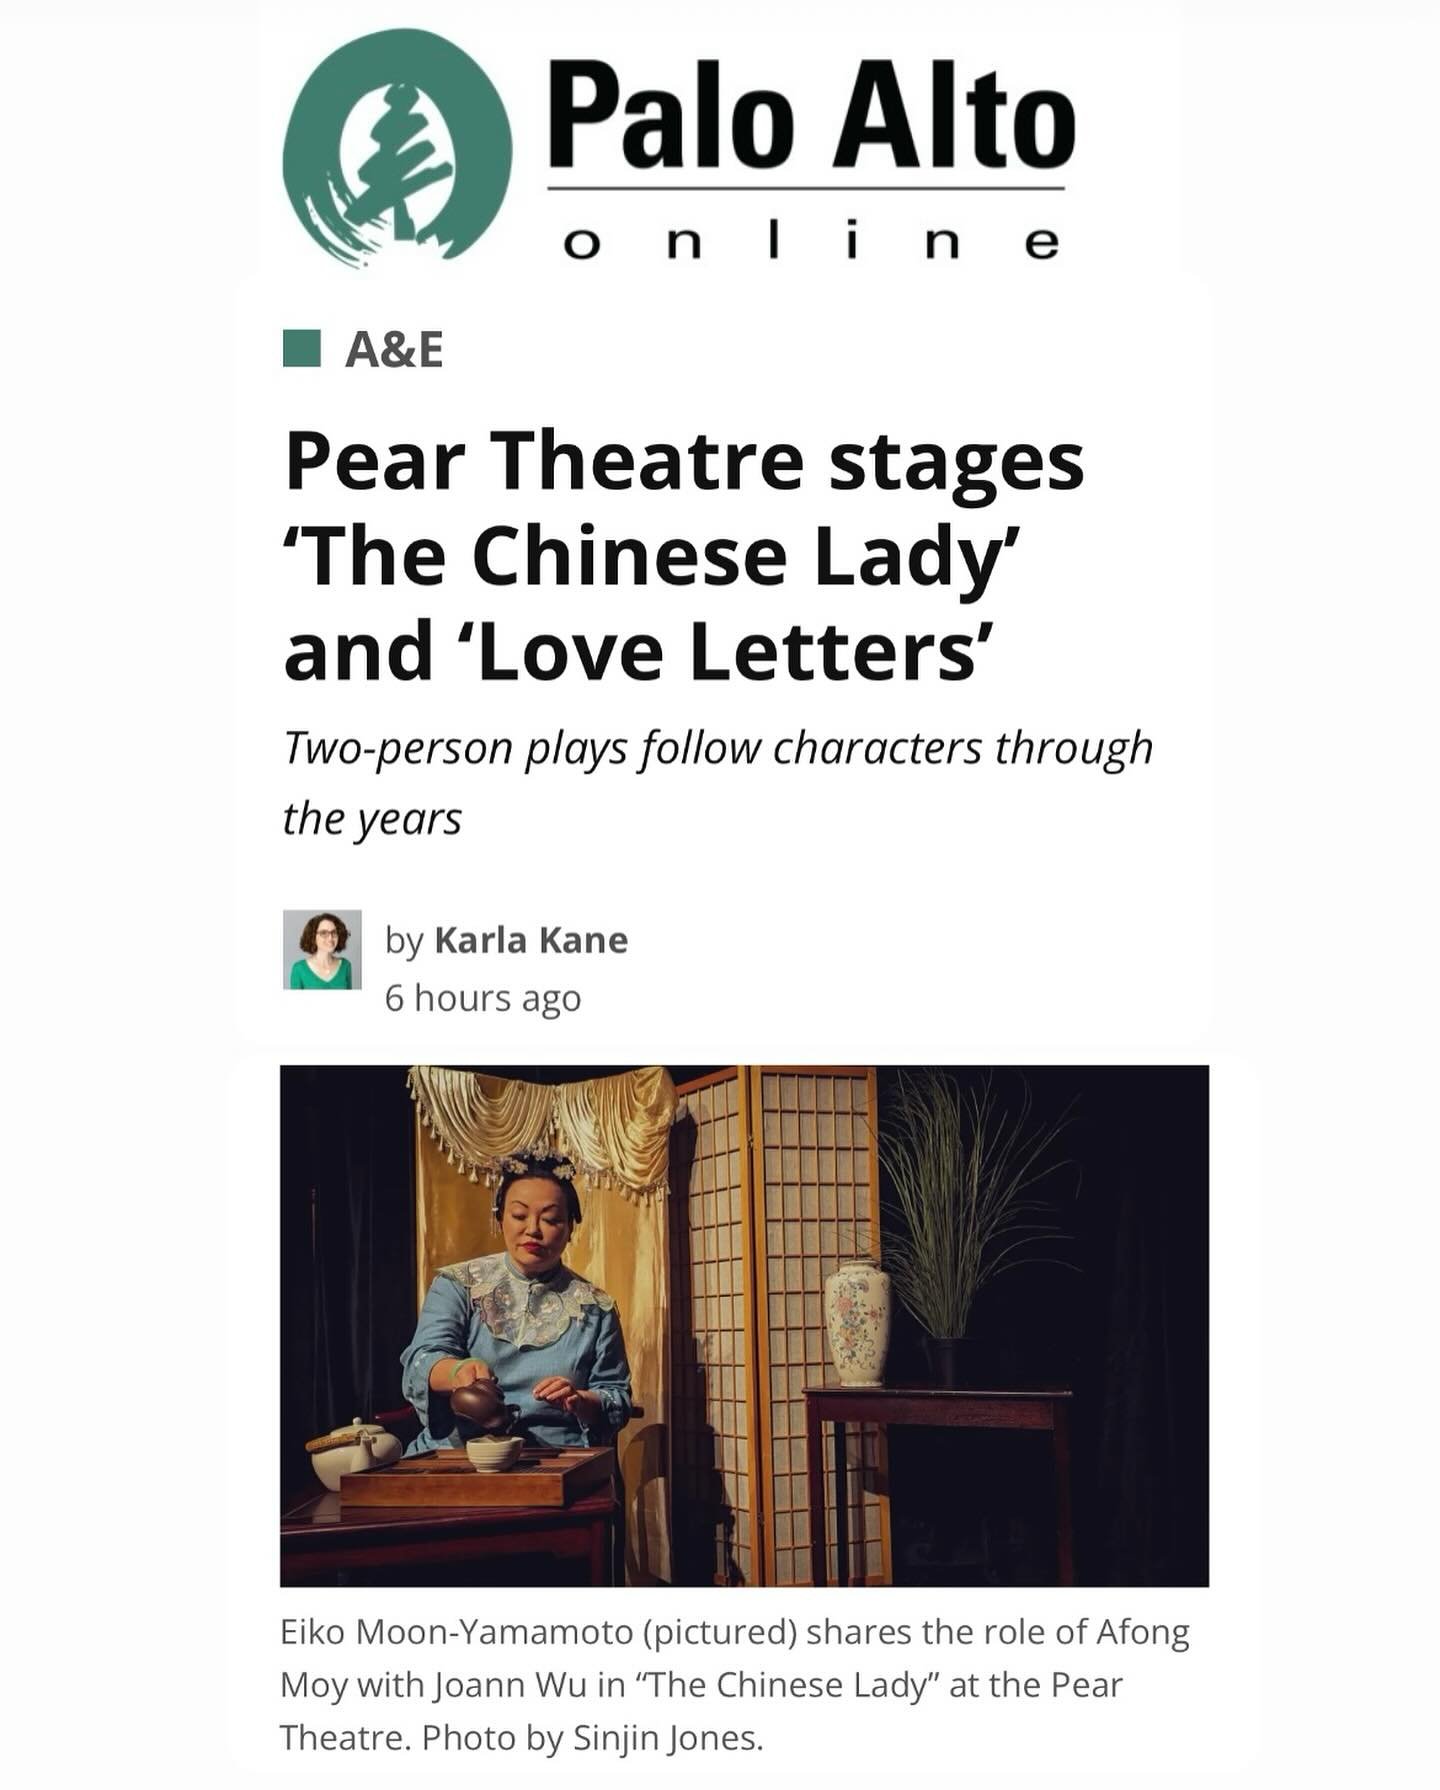 Our thanks and gratitude to Karla Kane at @paloaltoonline for another wonderful write-up on &lsquo;The Chinese Lady&rsquo; &amp; &lsquo;Love Letters&rsquo;, feat. excerpts from interviews with director Wynne Chan and actress Eiko Moon-Yamamoto! 

🔗 